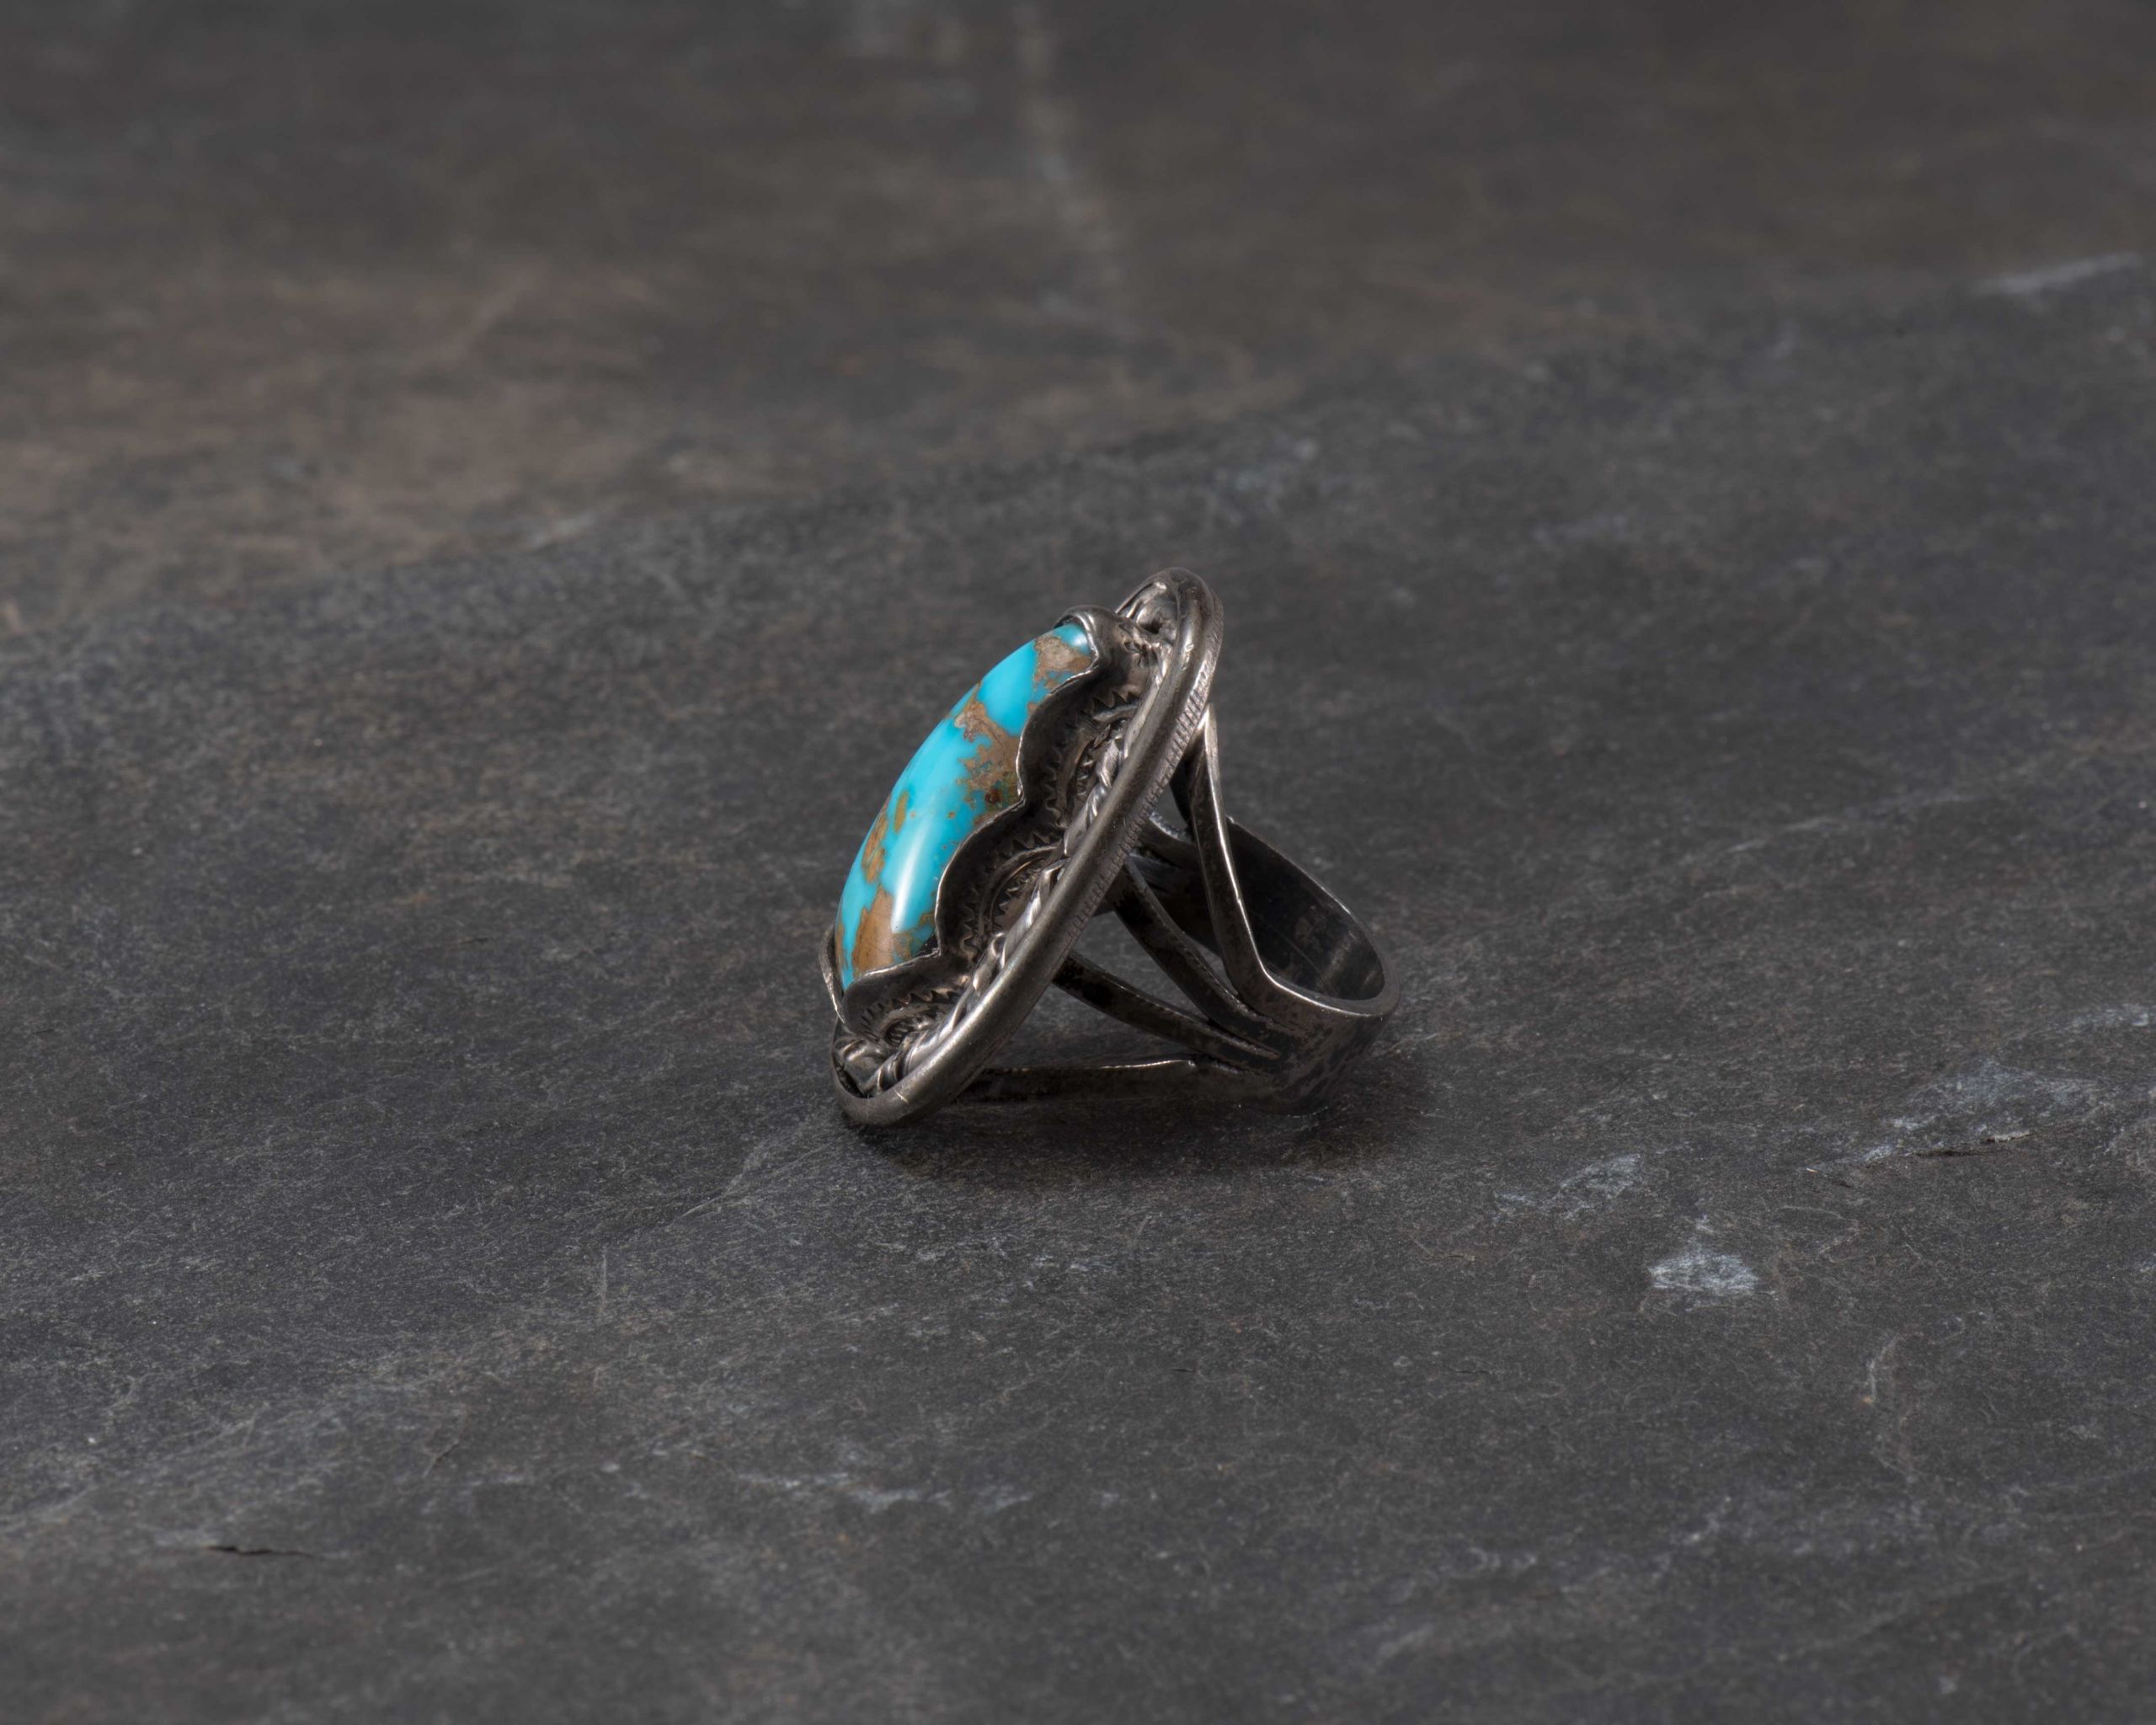 Vintage Turquoise Ring with Open Shank Detail